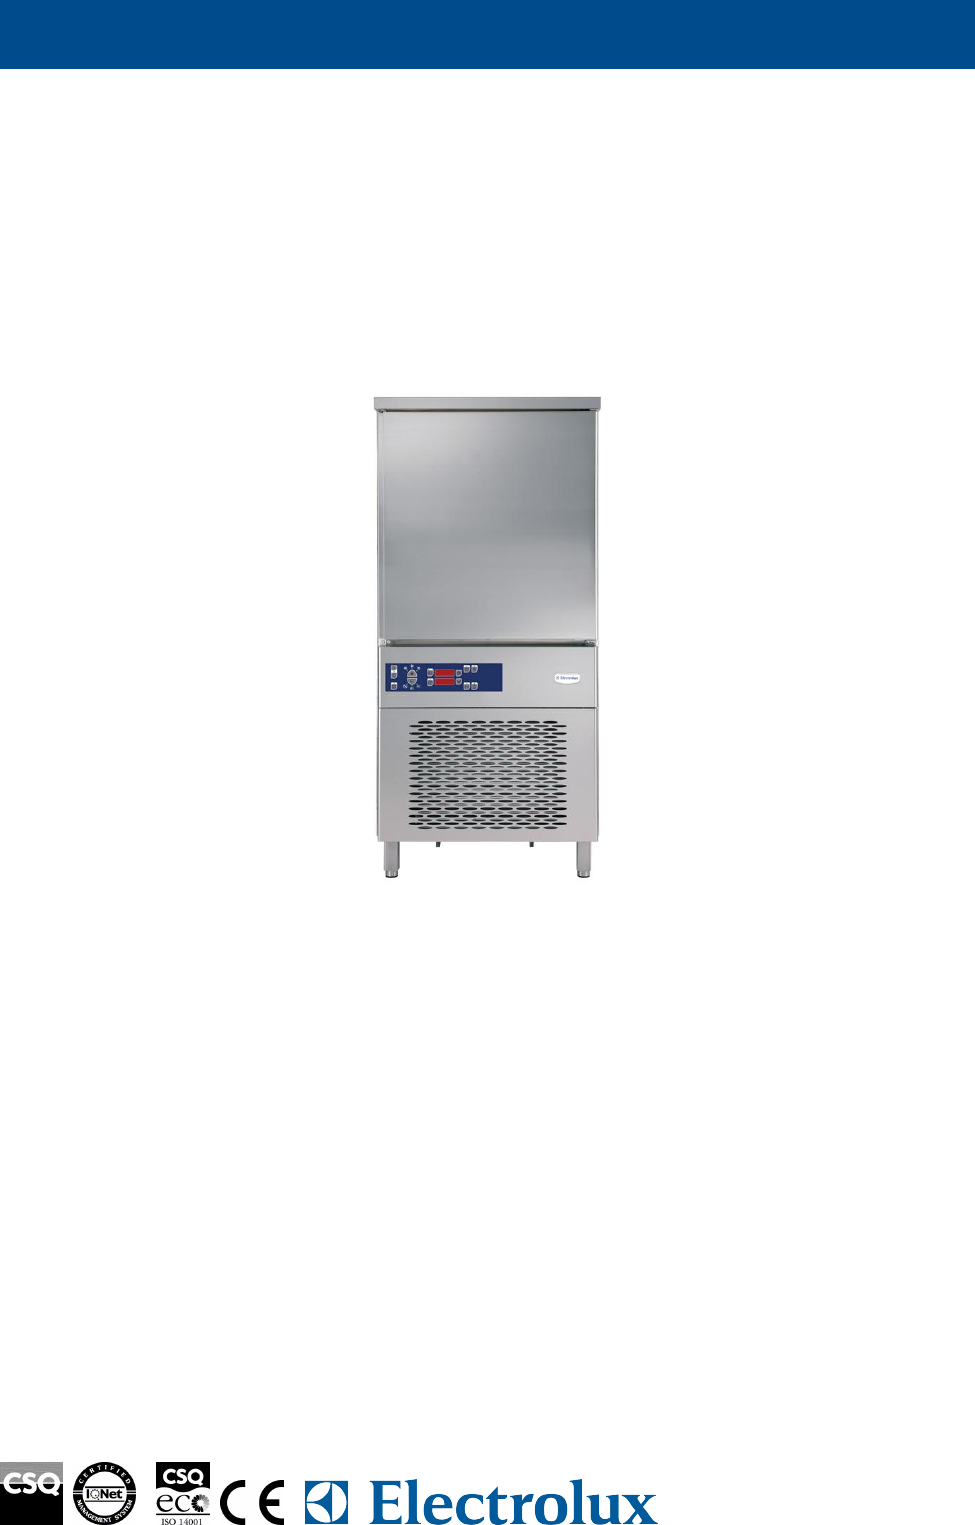 Electrolux Air O Chill blast chiller 